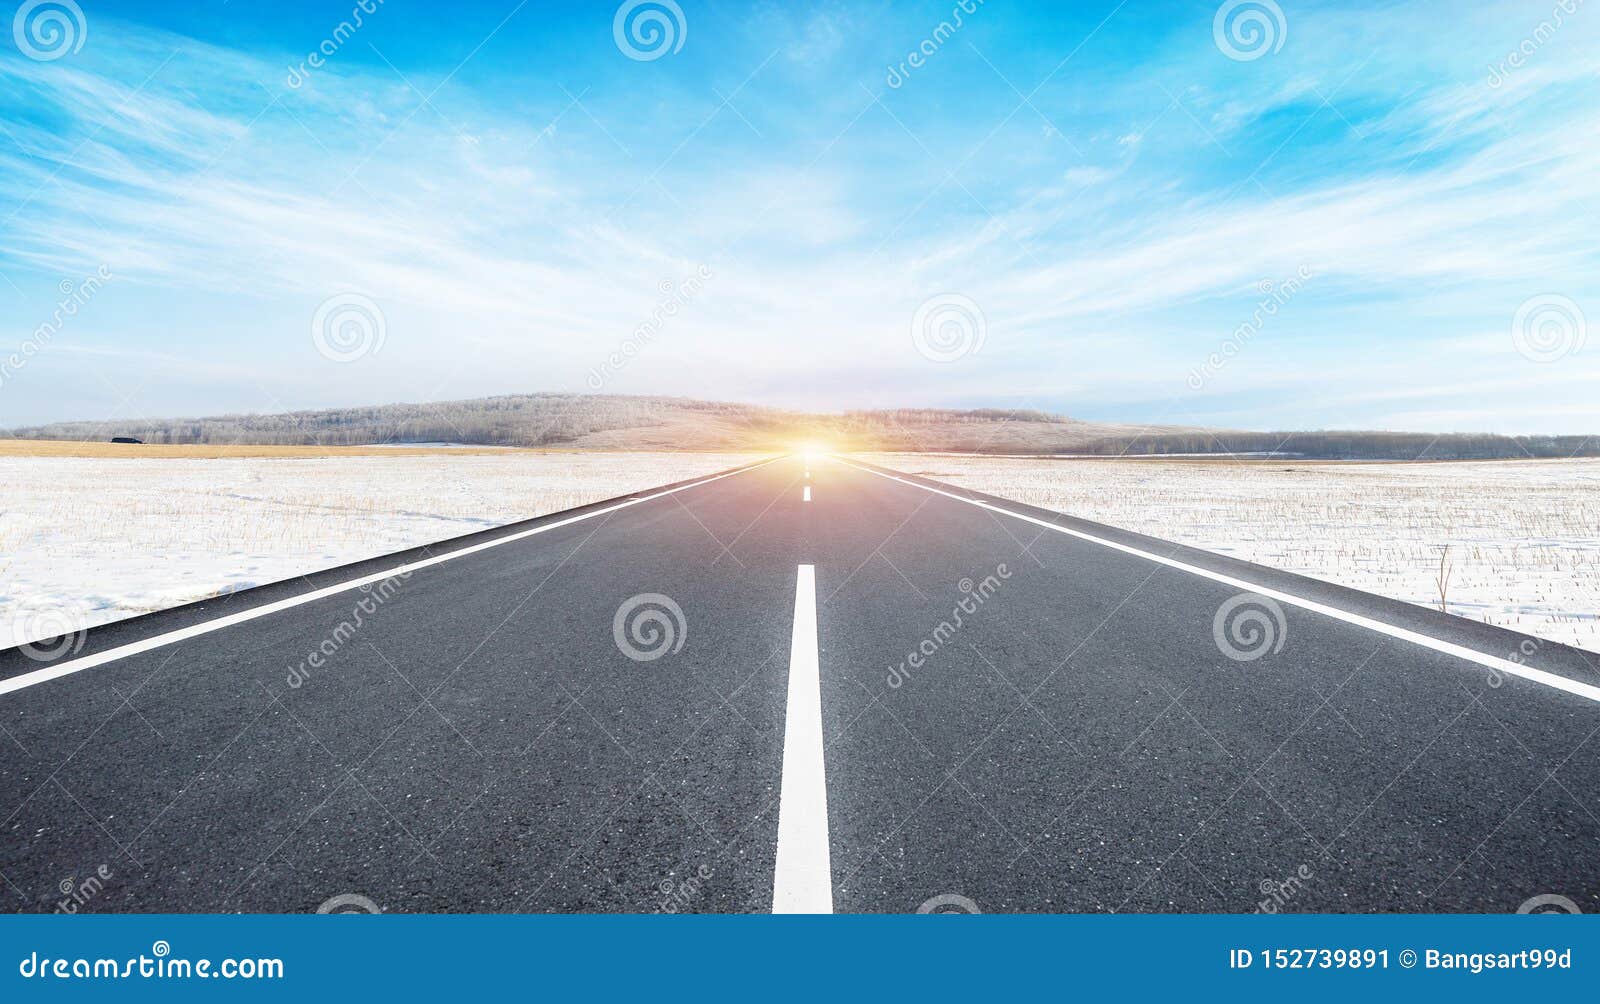 The Road and Sky Background Stock Image - Image of countryside, empty:  152739891